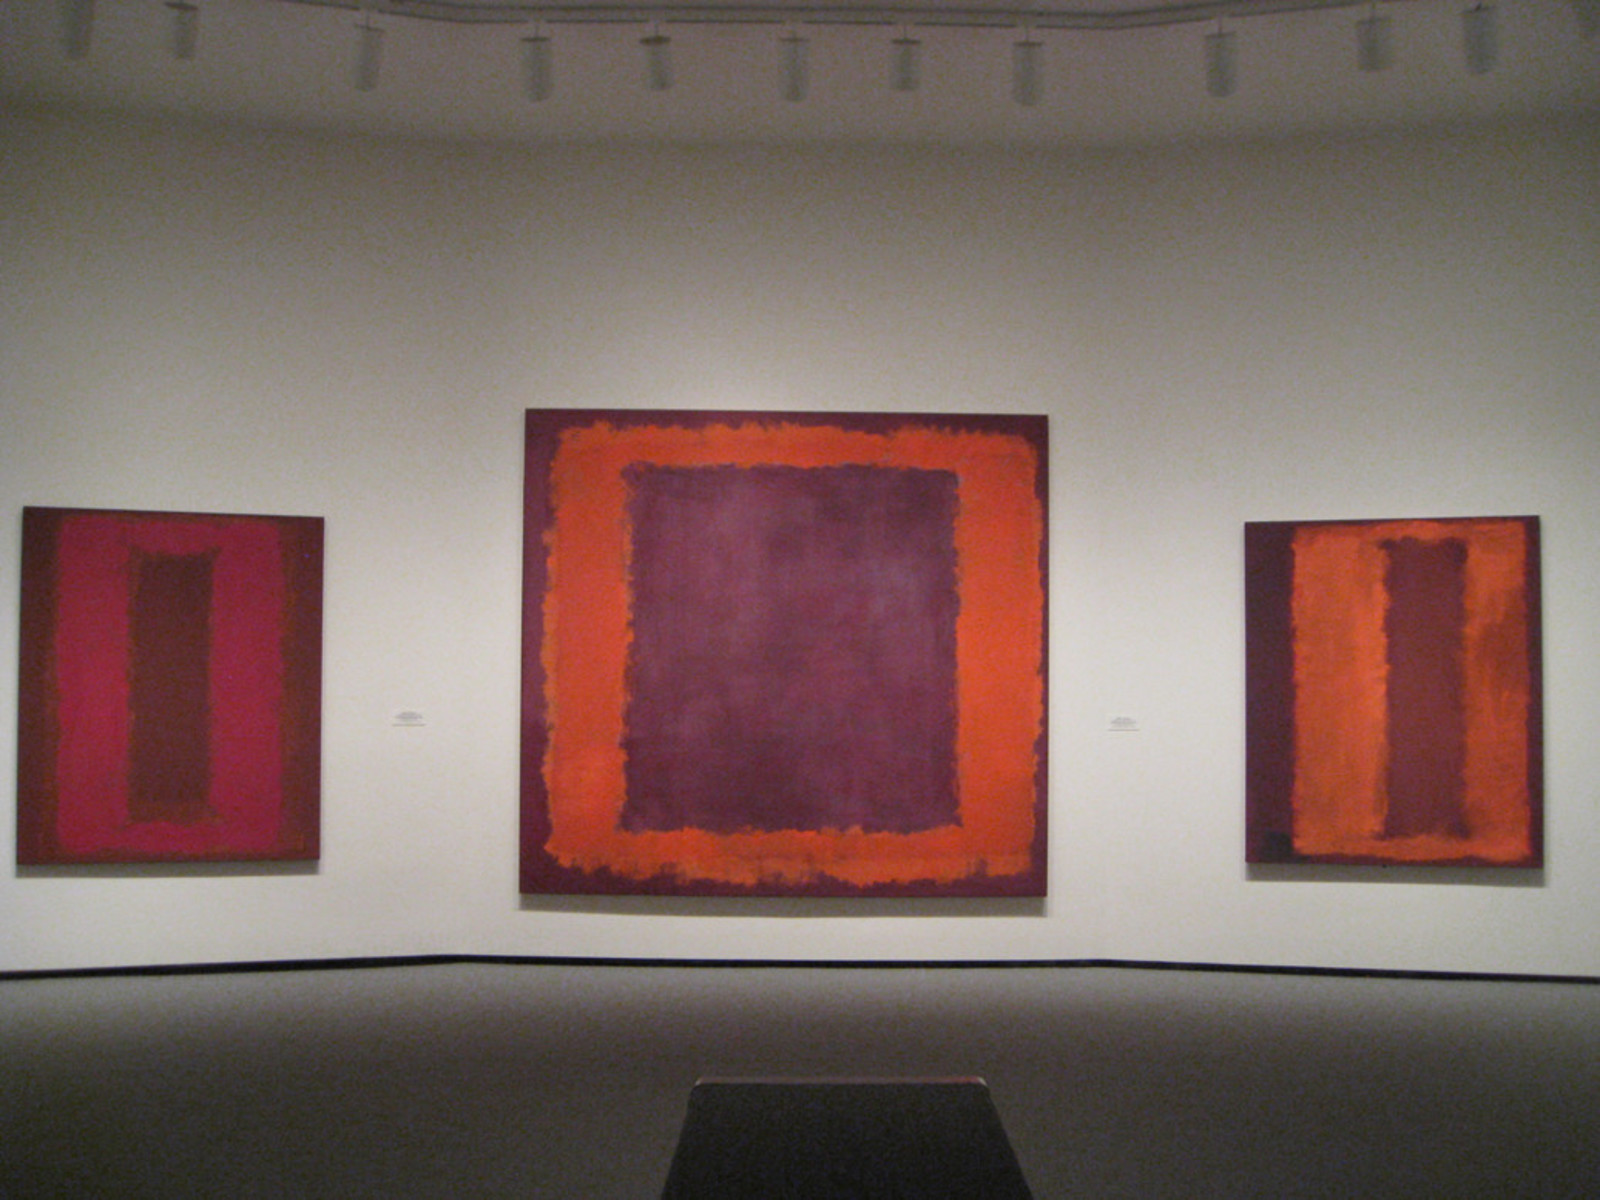 Mark Rothko, Untitled (Seagram Mural). 1959. Oil and mixed media on canvas. 265.4 x 288.3 cm. The National Gallery of Art, Washington. Gift of The Mark Rothko Foundation